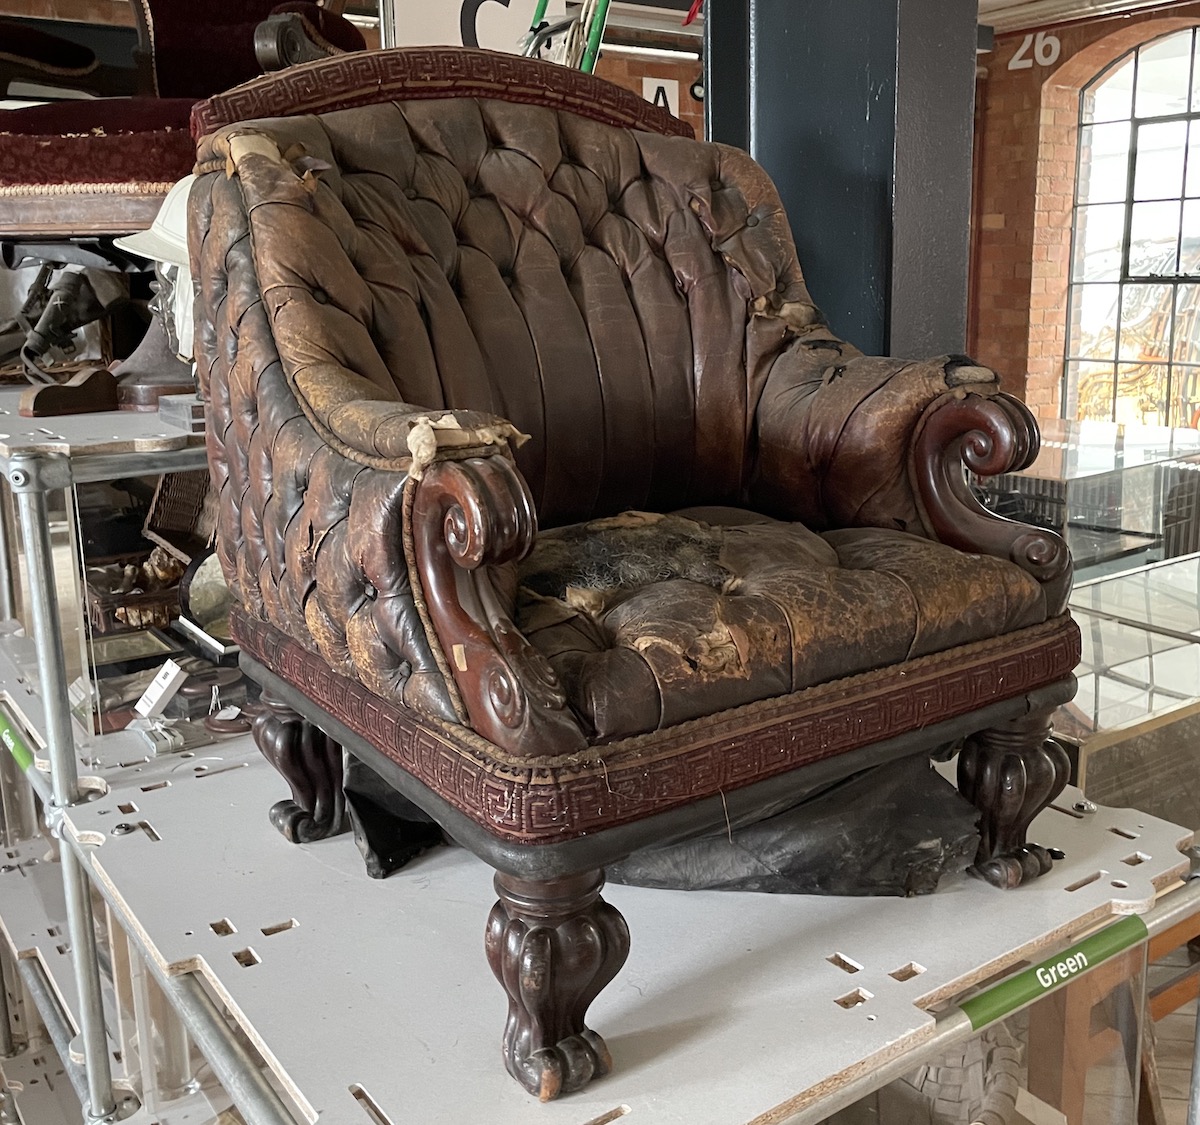 A very time-work leather arm chair